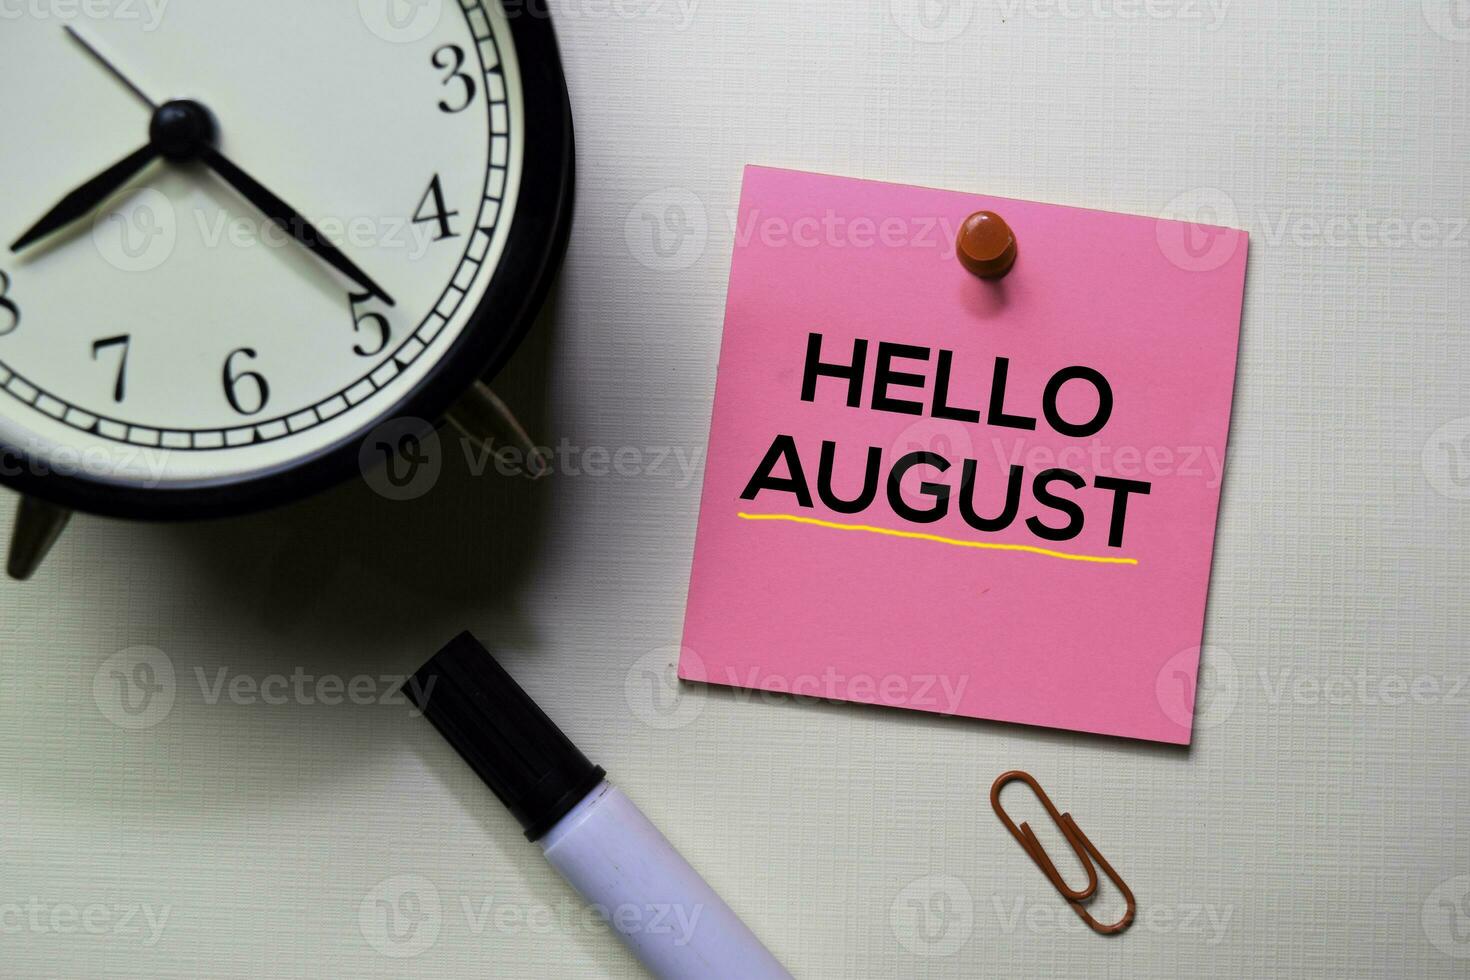 Hello August text on sticky notes isolated on office desk photo